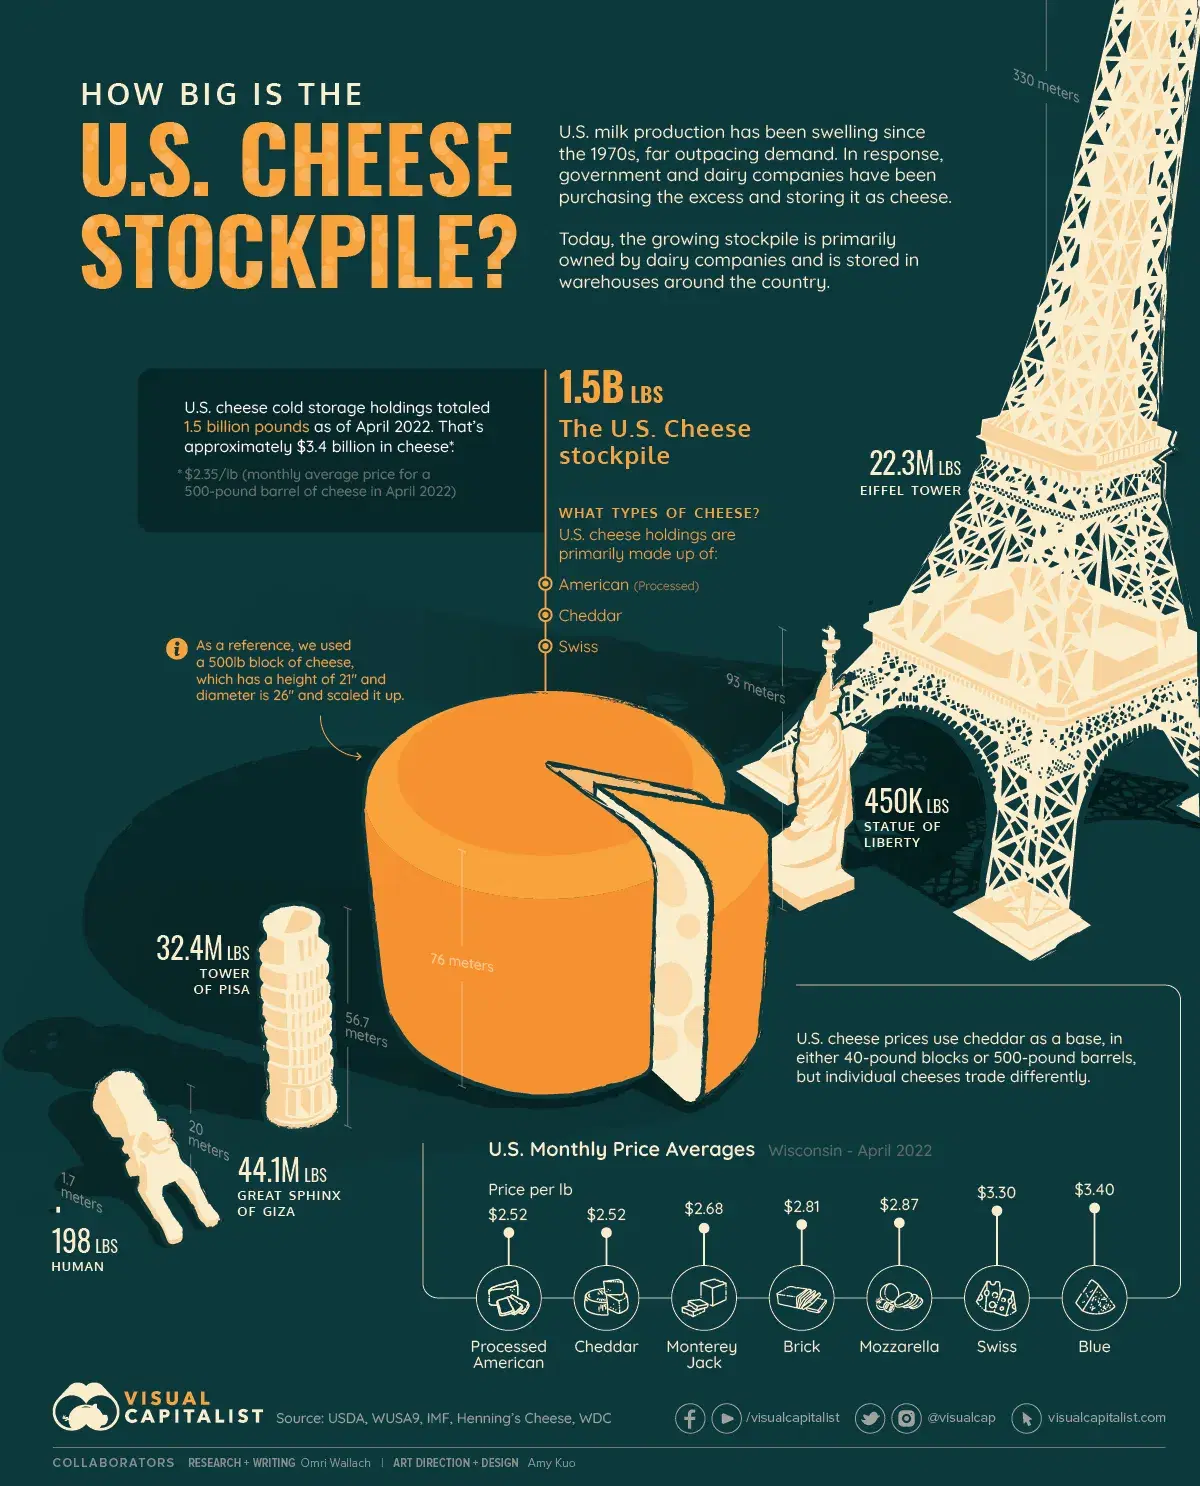 How Big is the U.S. Cheese Stockpile?